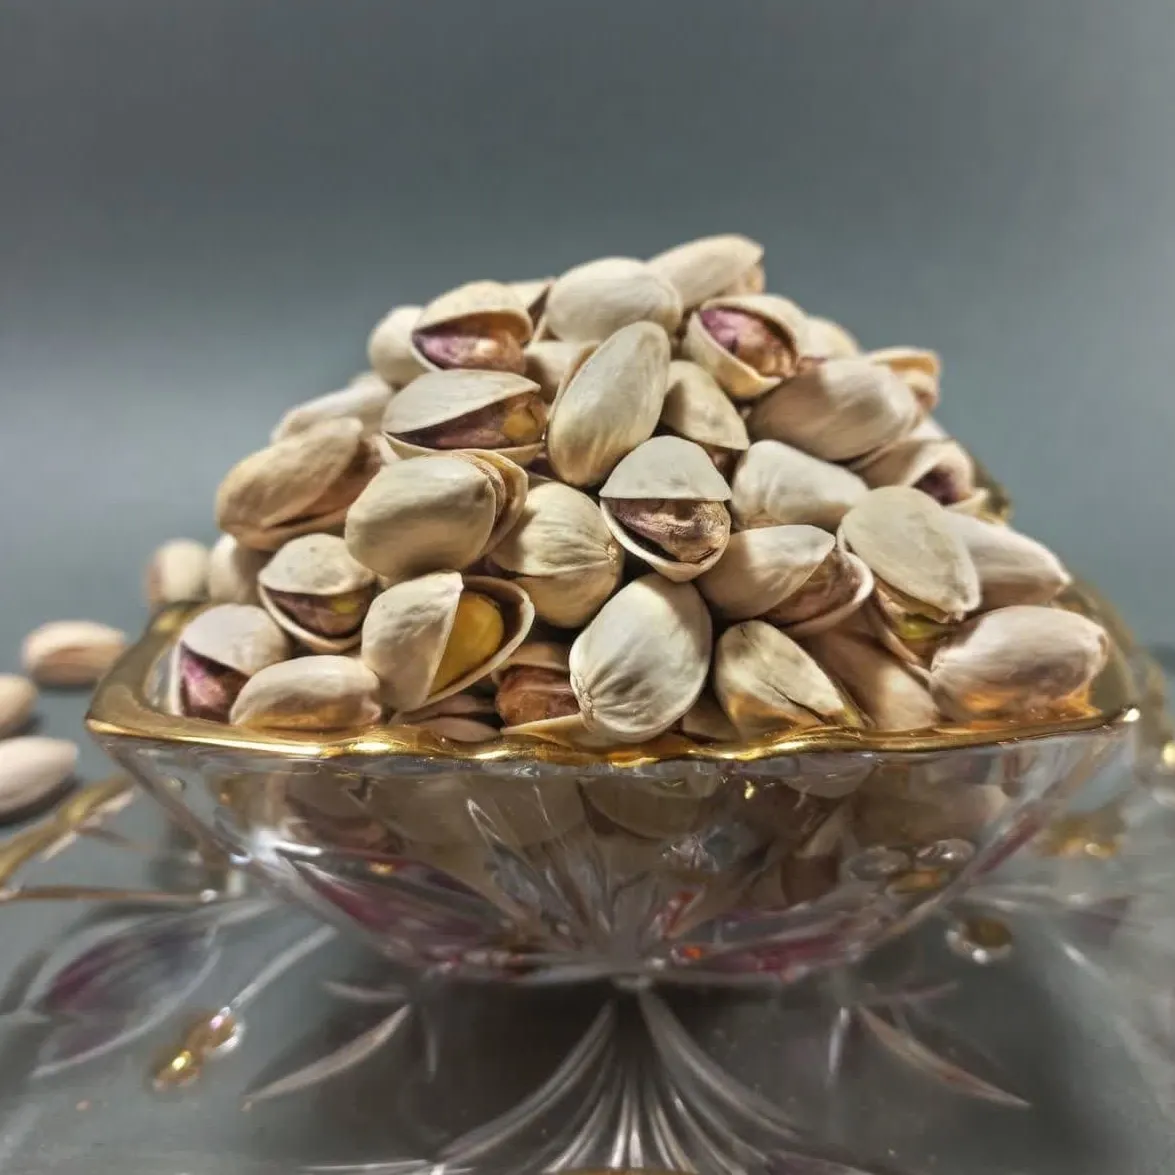 Purchase and today price of Iranian pistachios Canada 